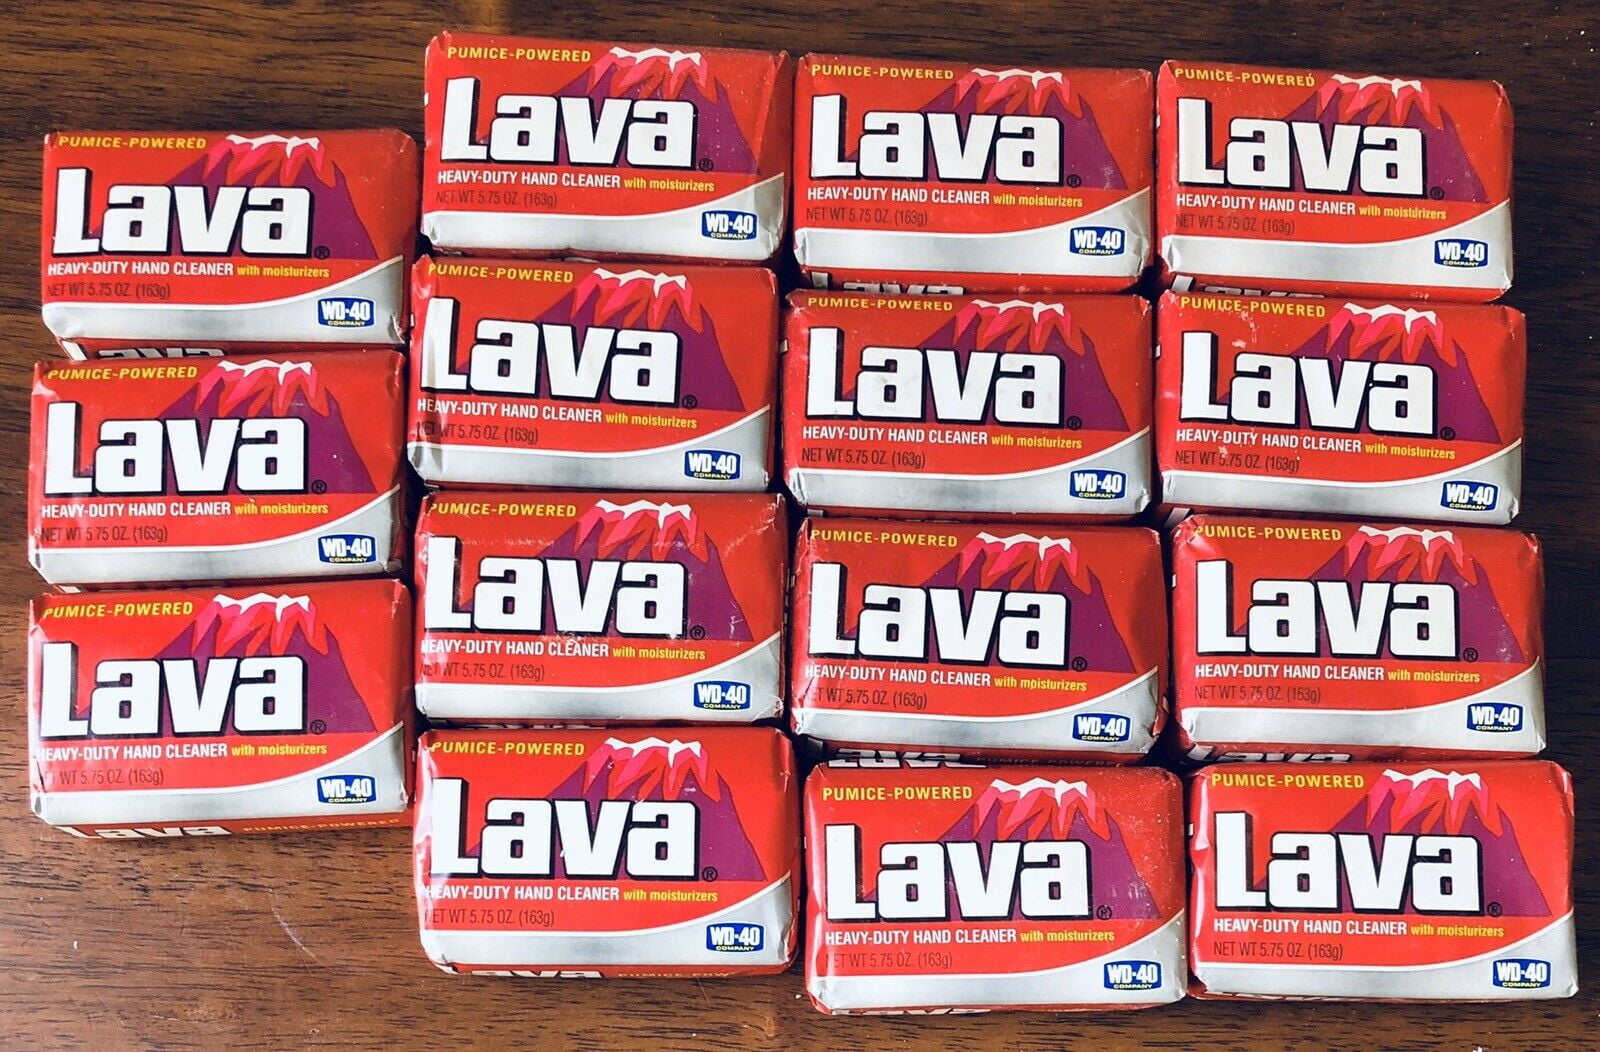 Lava Heavy-Duty Hand Cleaner Bar Soap, 5.75 oz Twin Pack